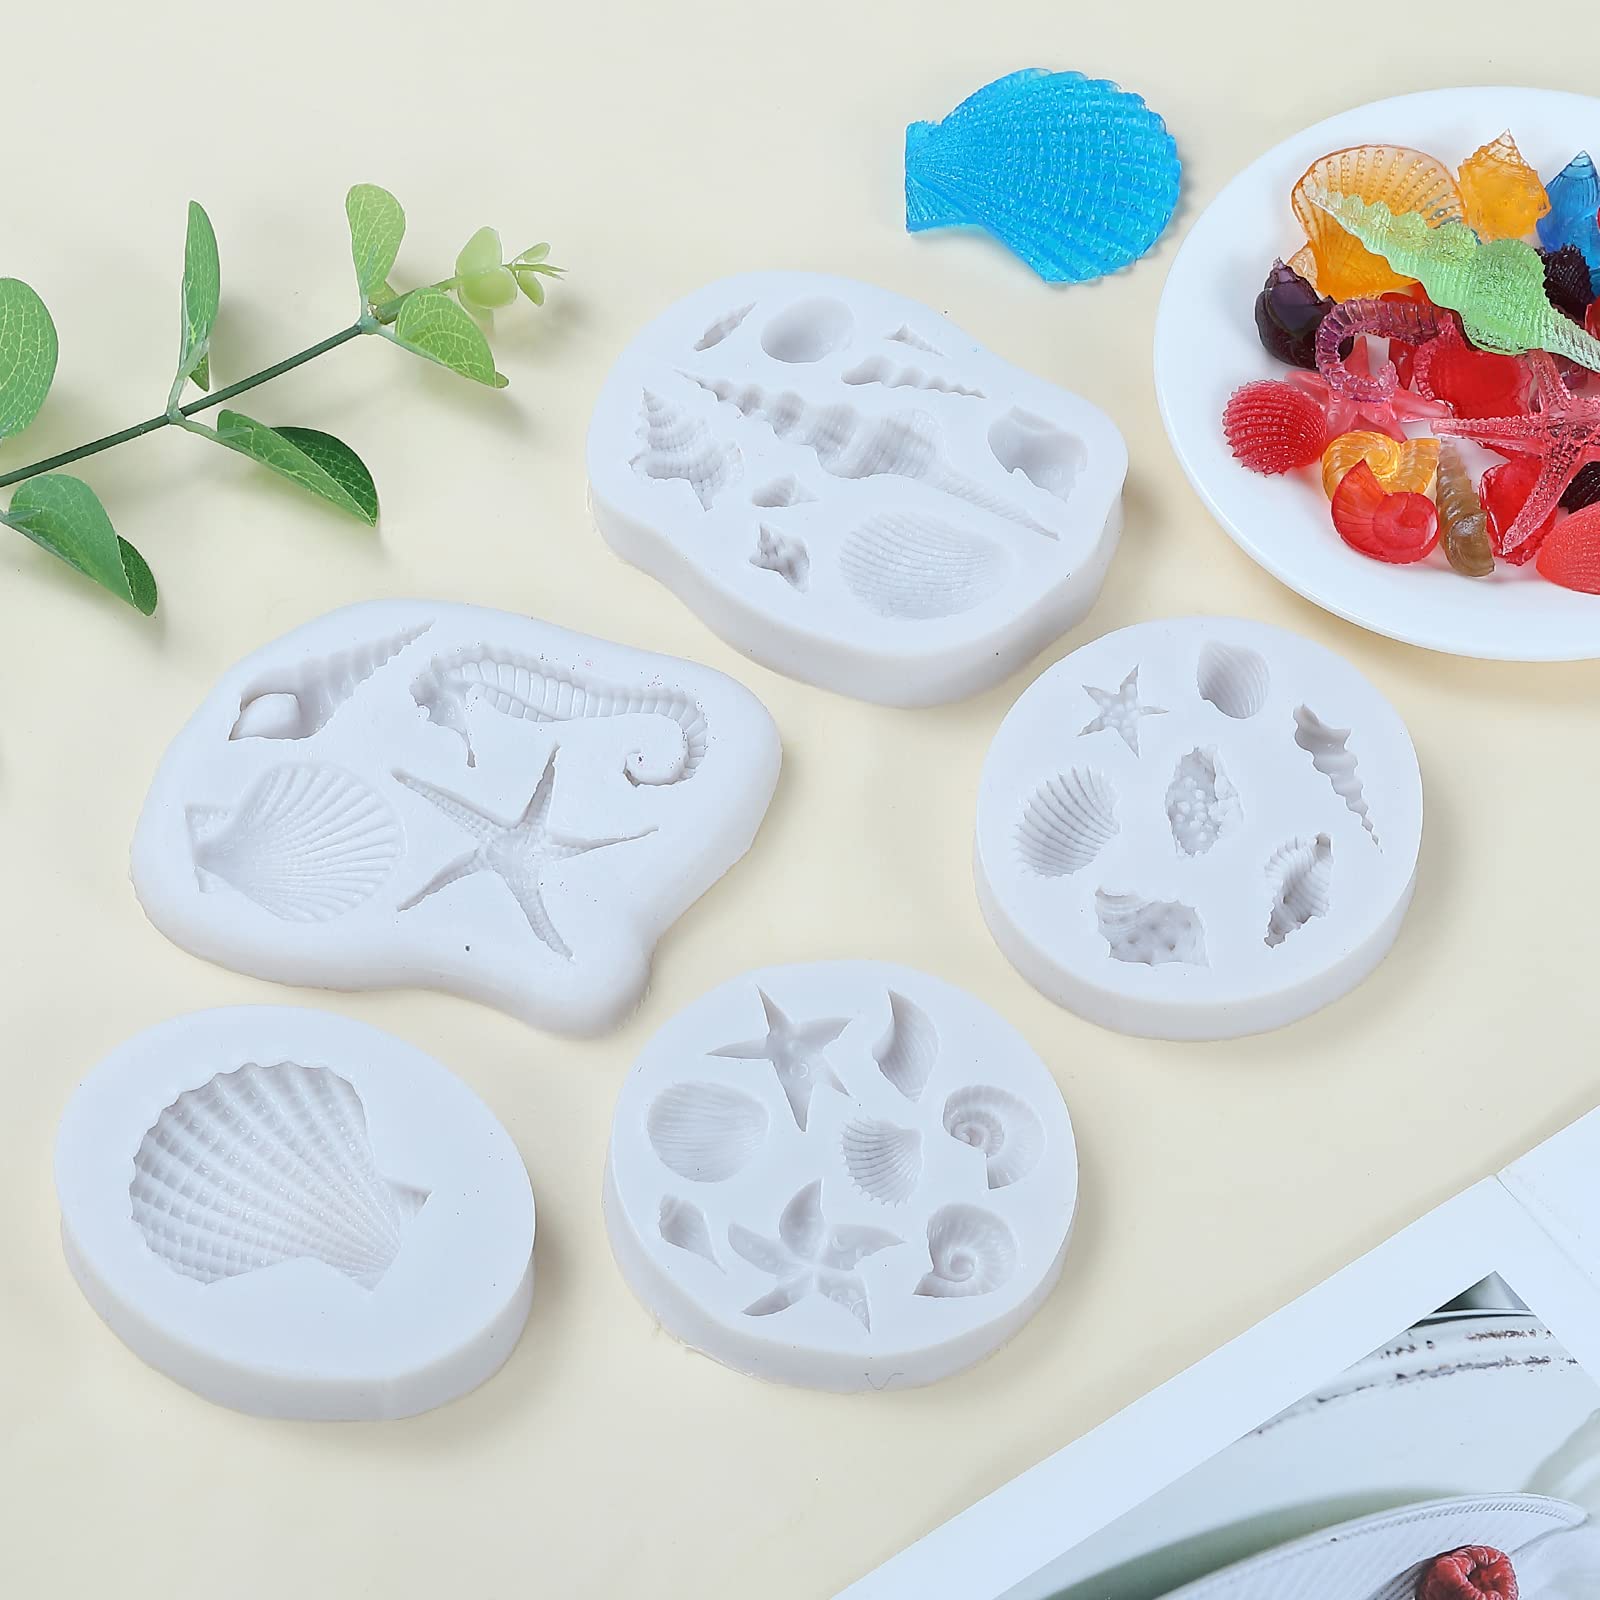 5 Pcs Marine Theme Cake Fondant Silicone Mold Set, Seashell Conch Starfish Hippocampus DIY Baking Molds for Mermaid Theme Cake Decoration Fondant Chocolate Candy Polymer Clay Crafting Projects